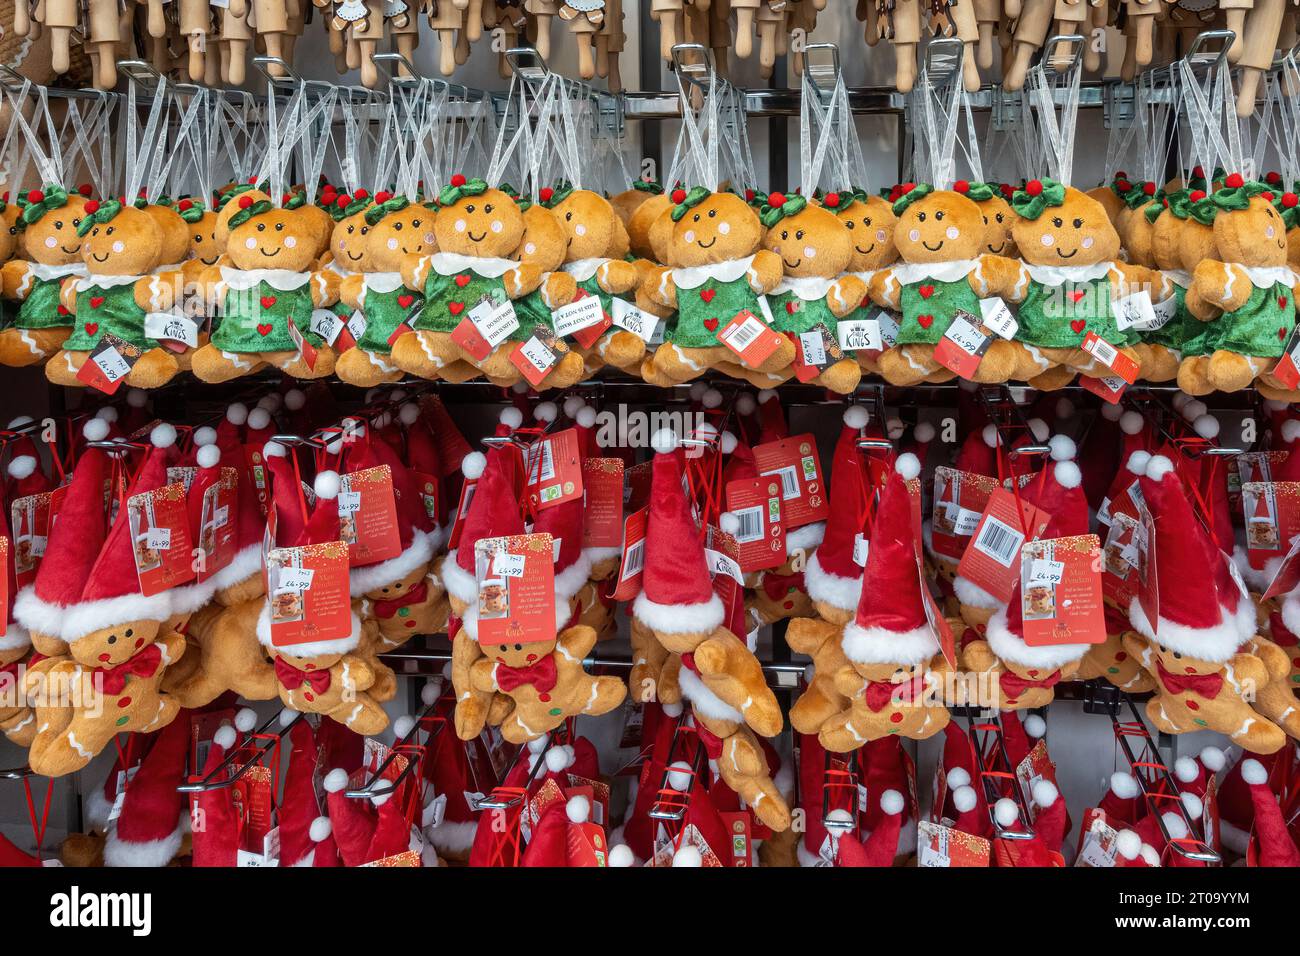 Christmas decorations for sale in a garden centre during October, England, UK Stock Photo